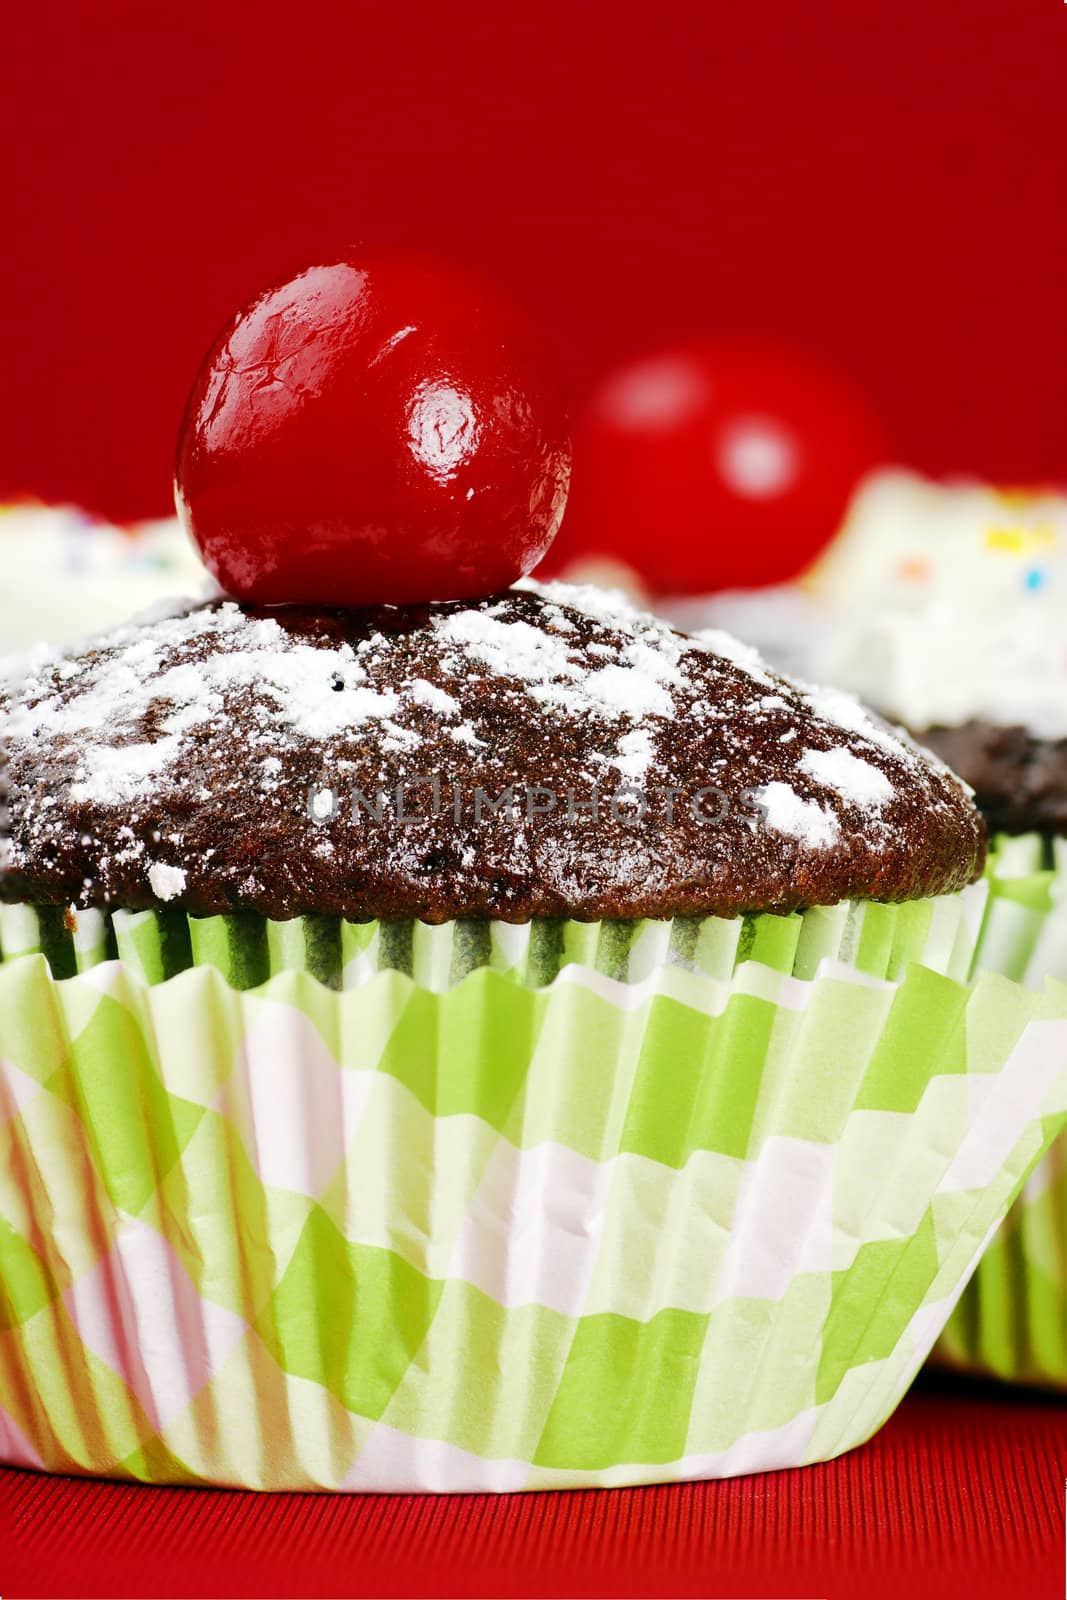 Delicious chocolate cupcakes topped with powdered sugar and maraschino cherry, other desserts with frosting and candies at the back, over red, stacked focus.